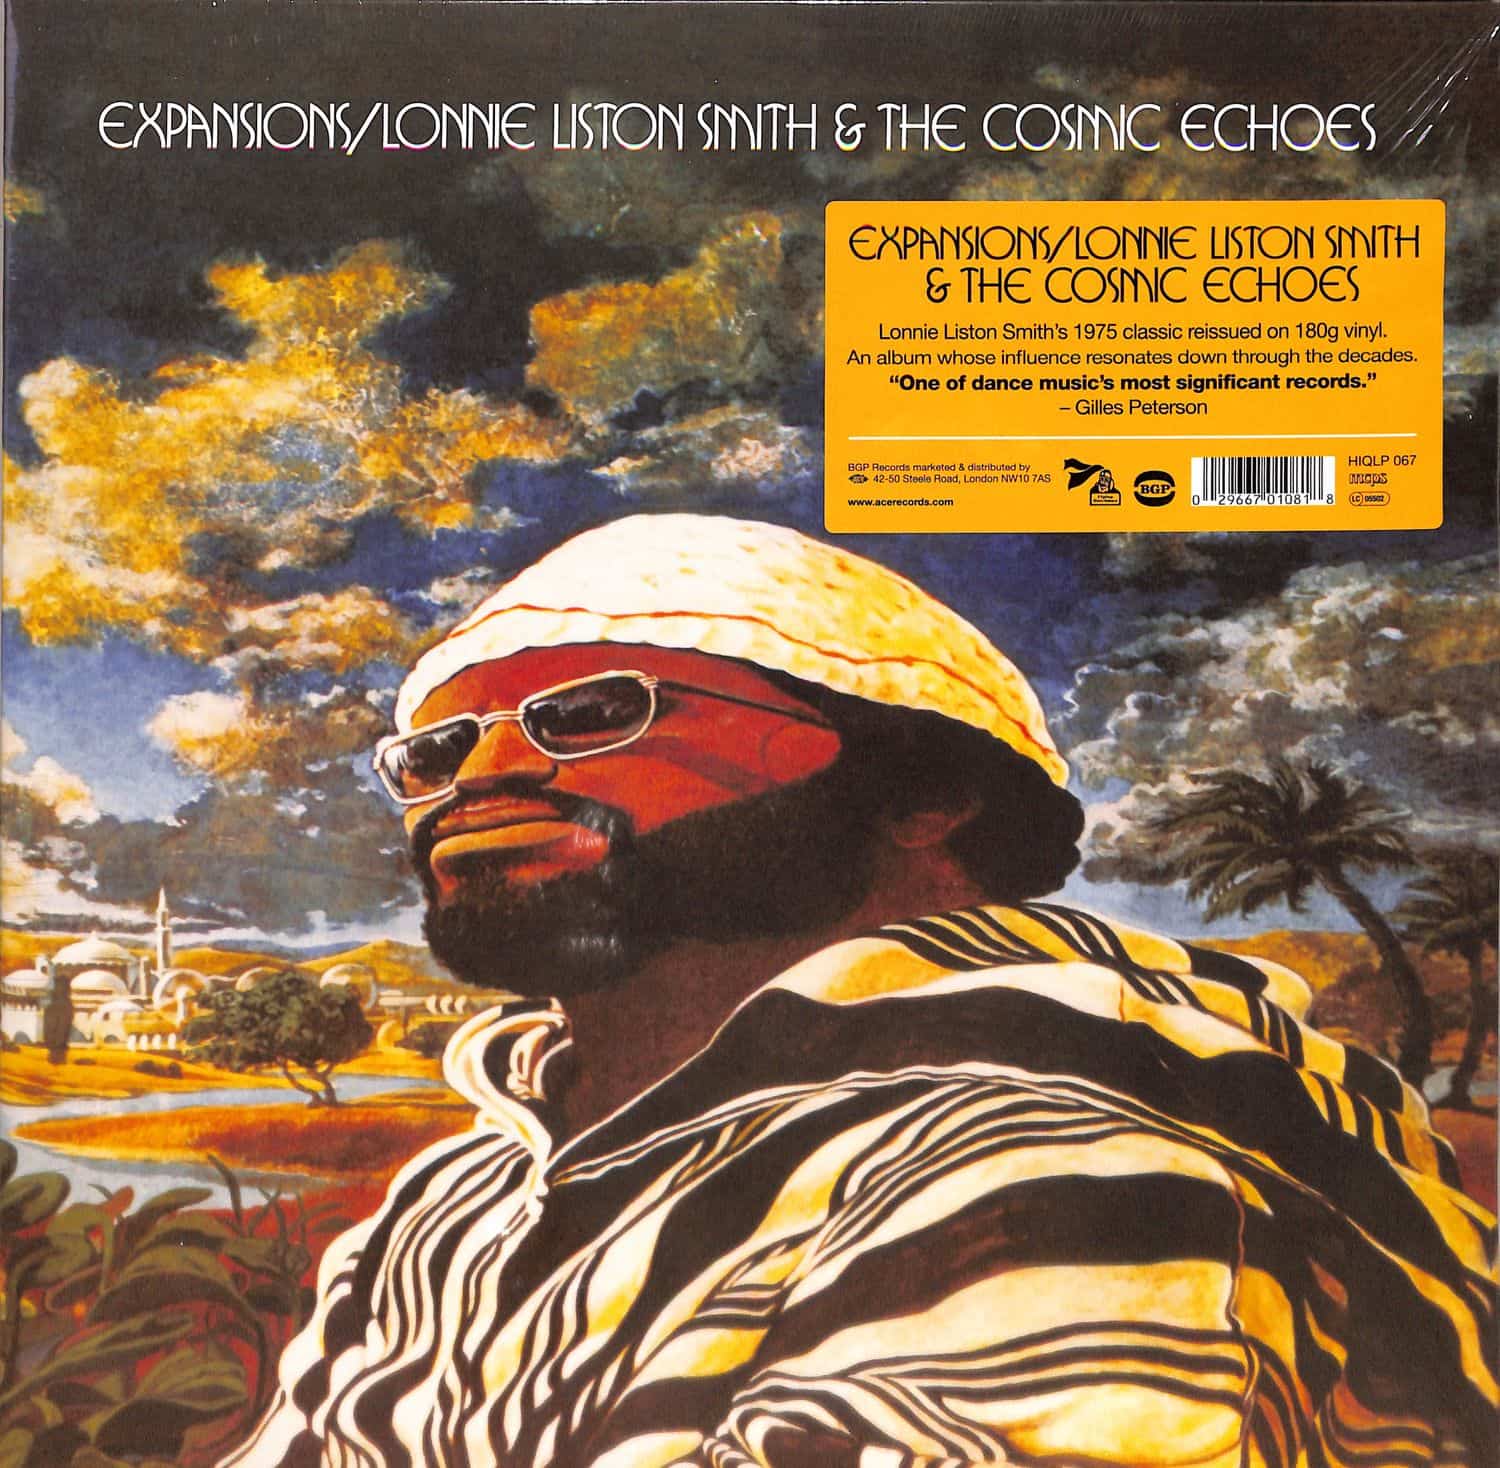 Lonnie Liston Smith - EXPANSIONS 